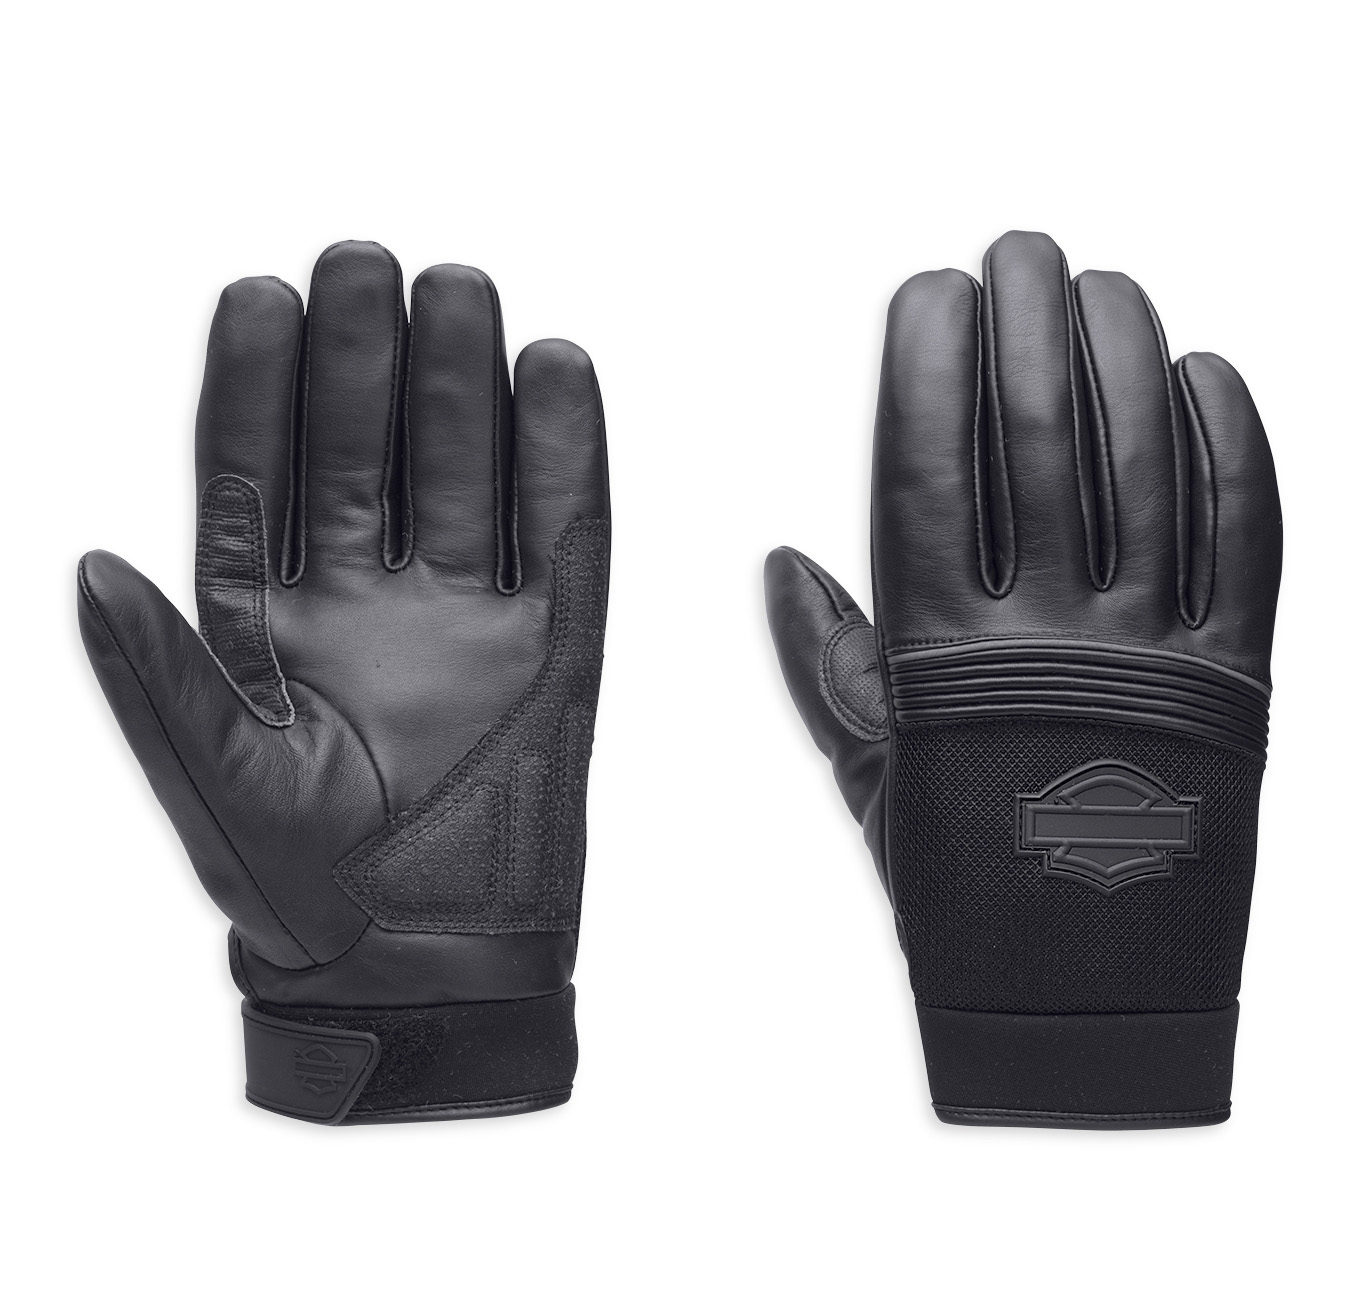 NEW BLACKOAK GLOVES WITH TOUCHTEC™ FROM HARLEY-DAVIDSON | Born To Ride ...